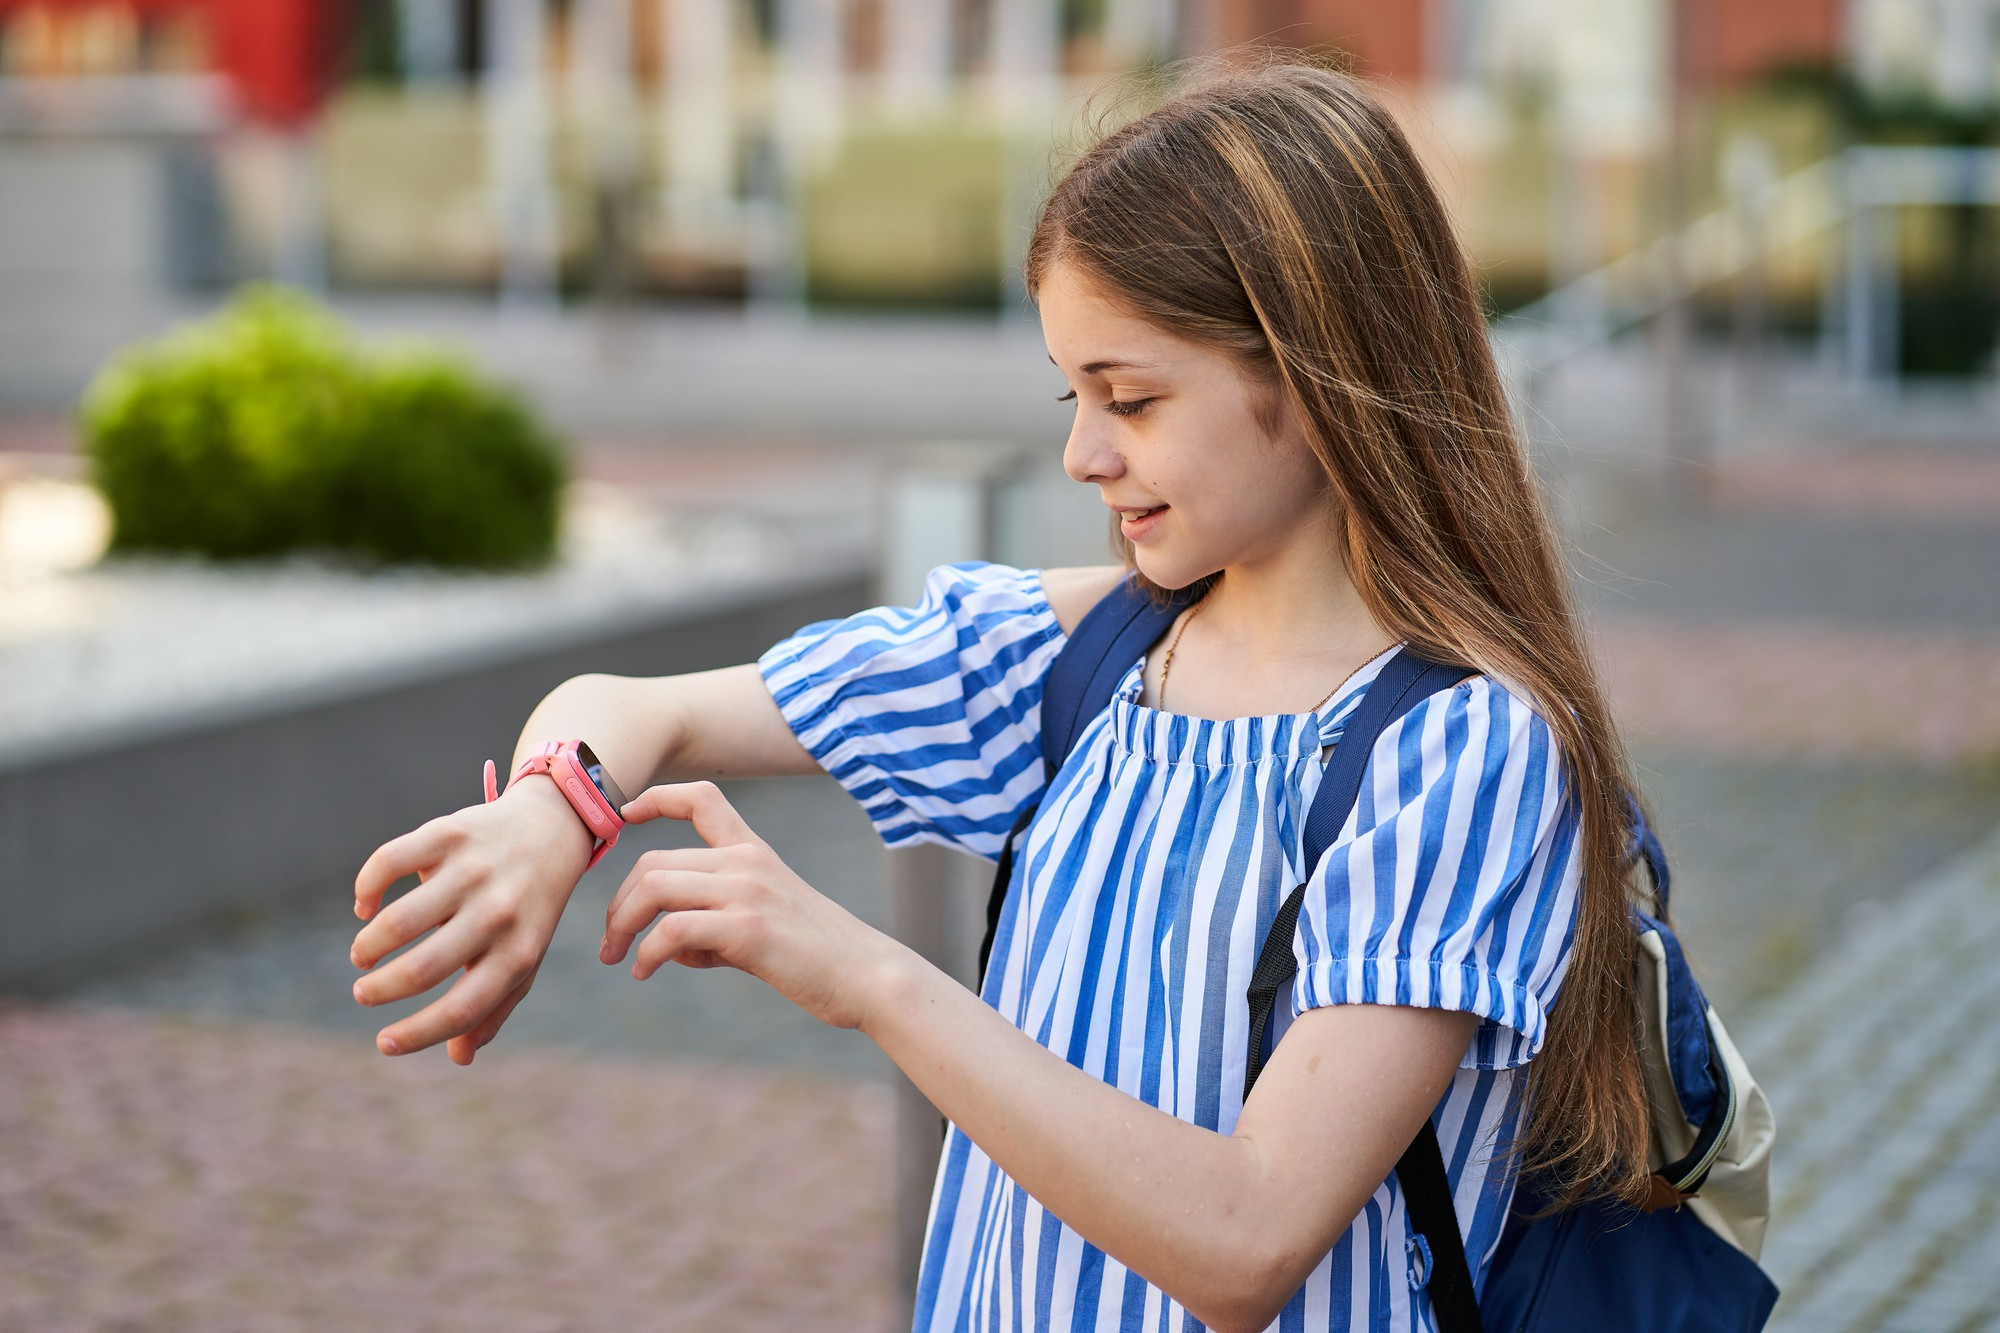 Apple Watch for Kids: A Parent's Guide